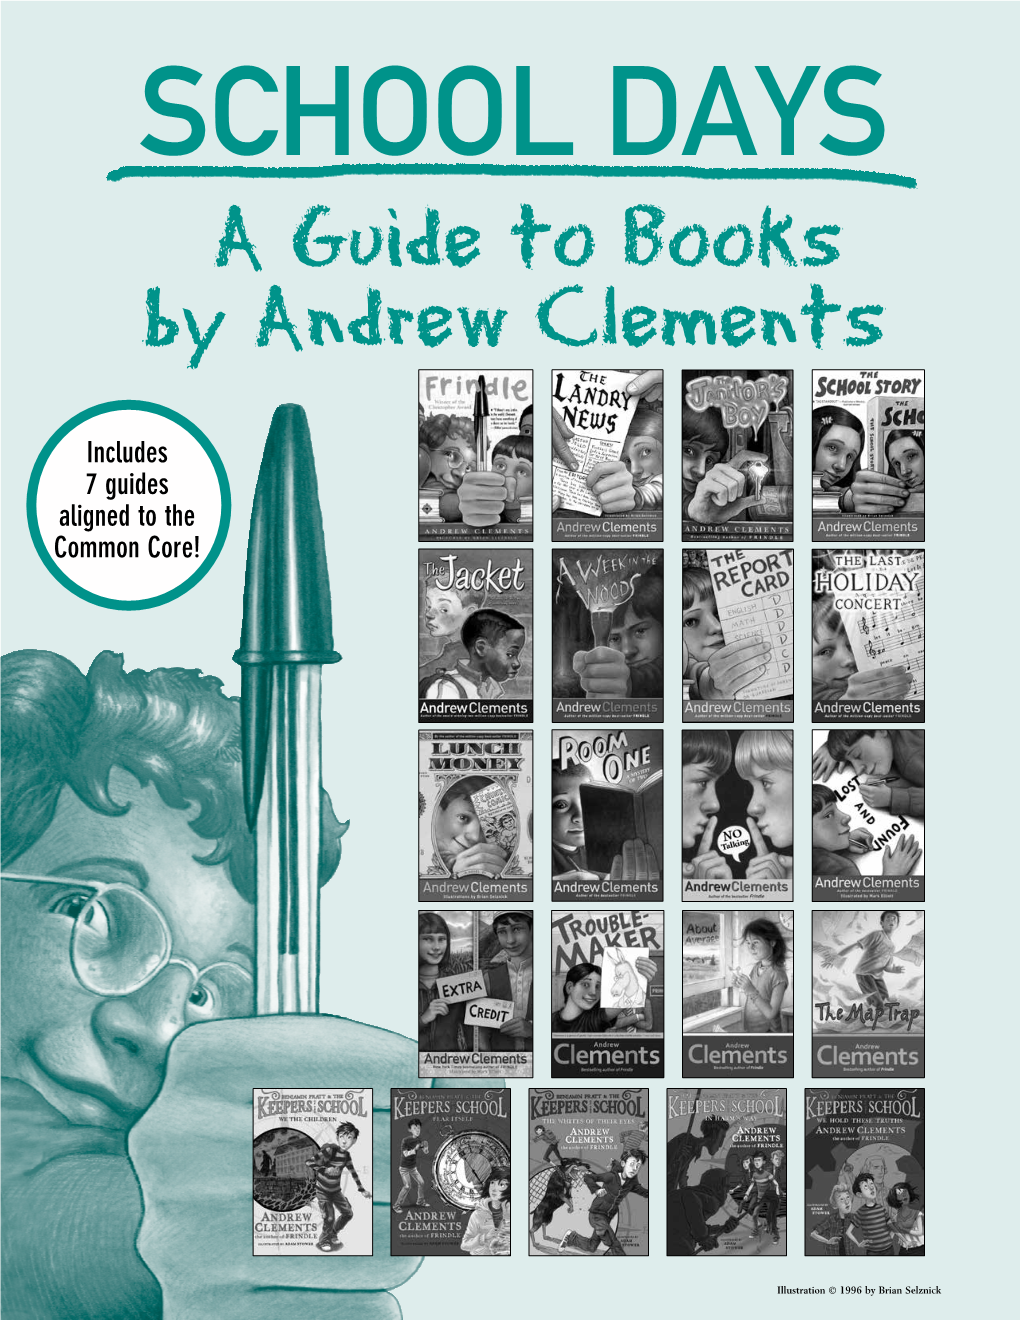 A Guide to Books by Andrew Clements